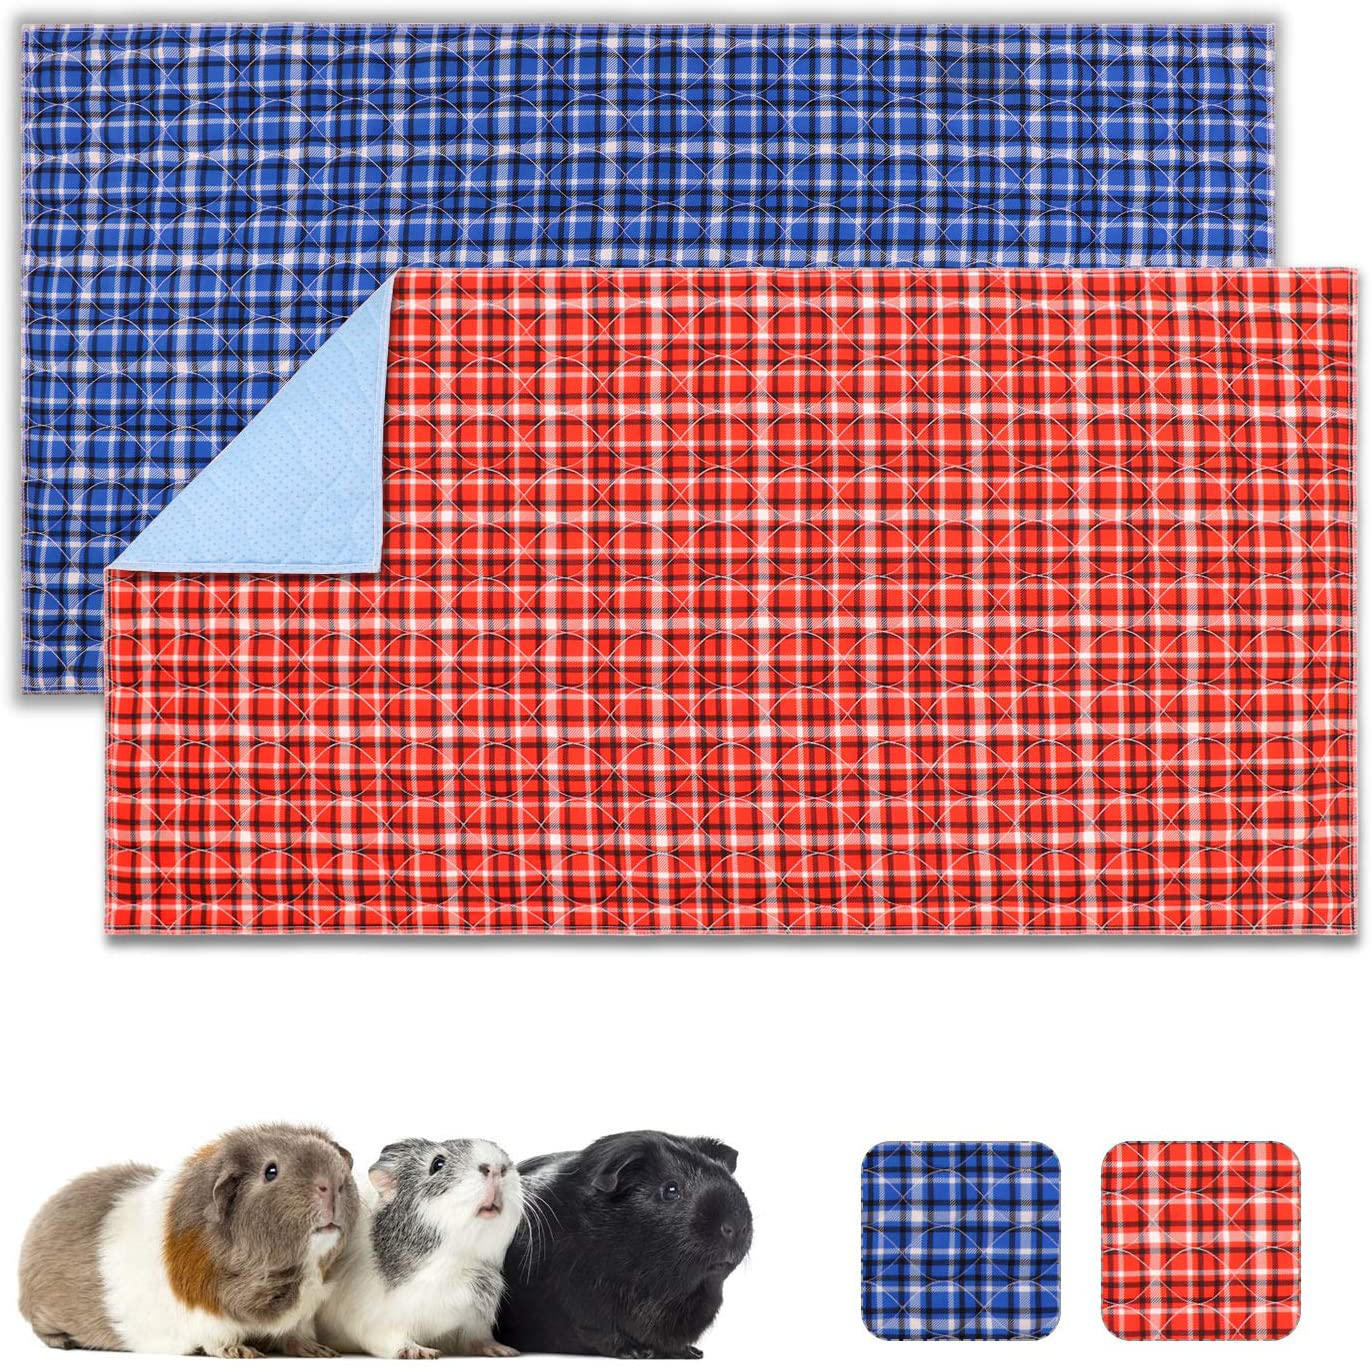 Uteuvili 2 PCS Guinea Pig Cage Liners Guinea Pig Bedding Washable Waterproof Reusable anti Slip Super Absorbent Pee Pads for Small Animals (Red&Blue Plaid 24"X 47")